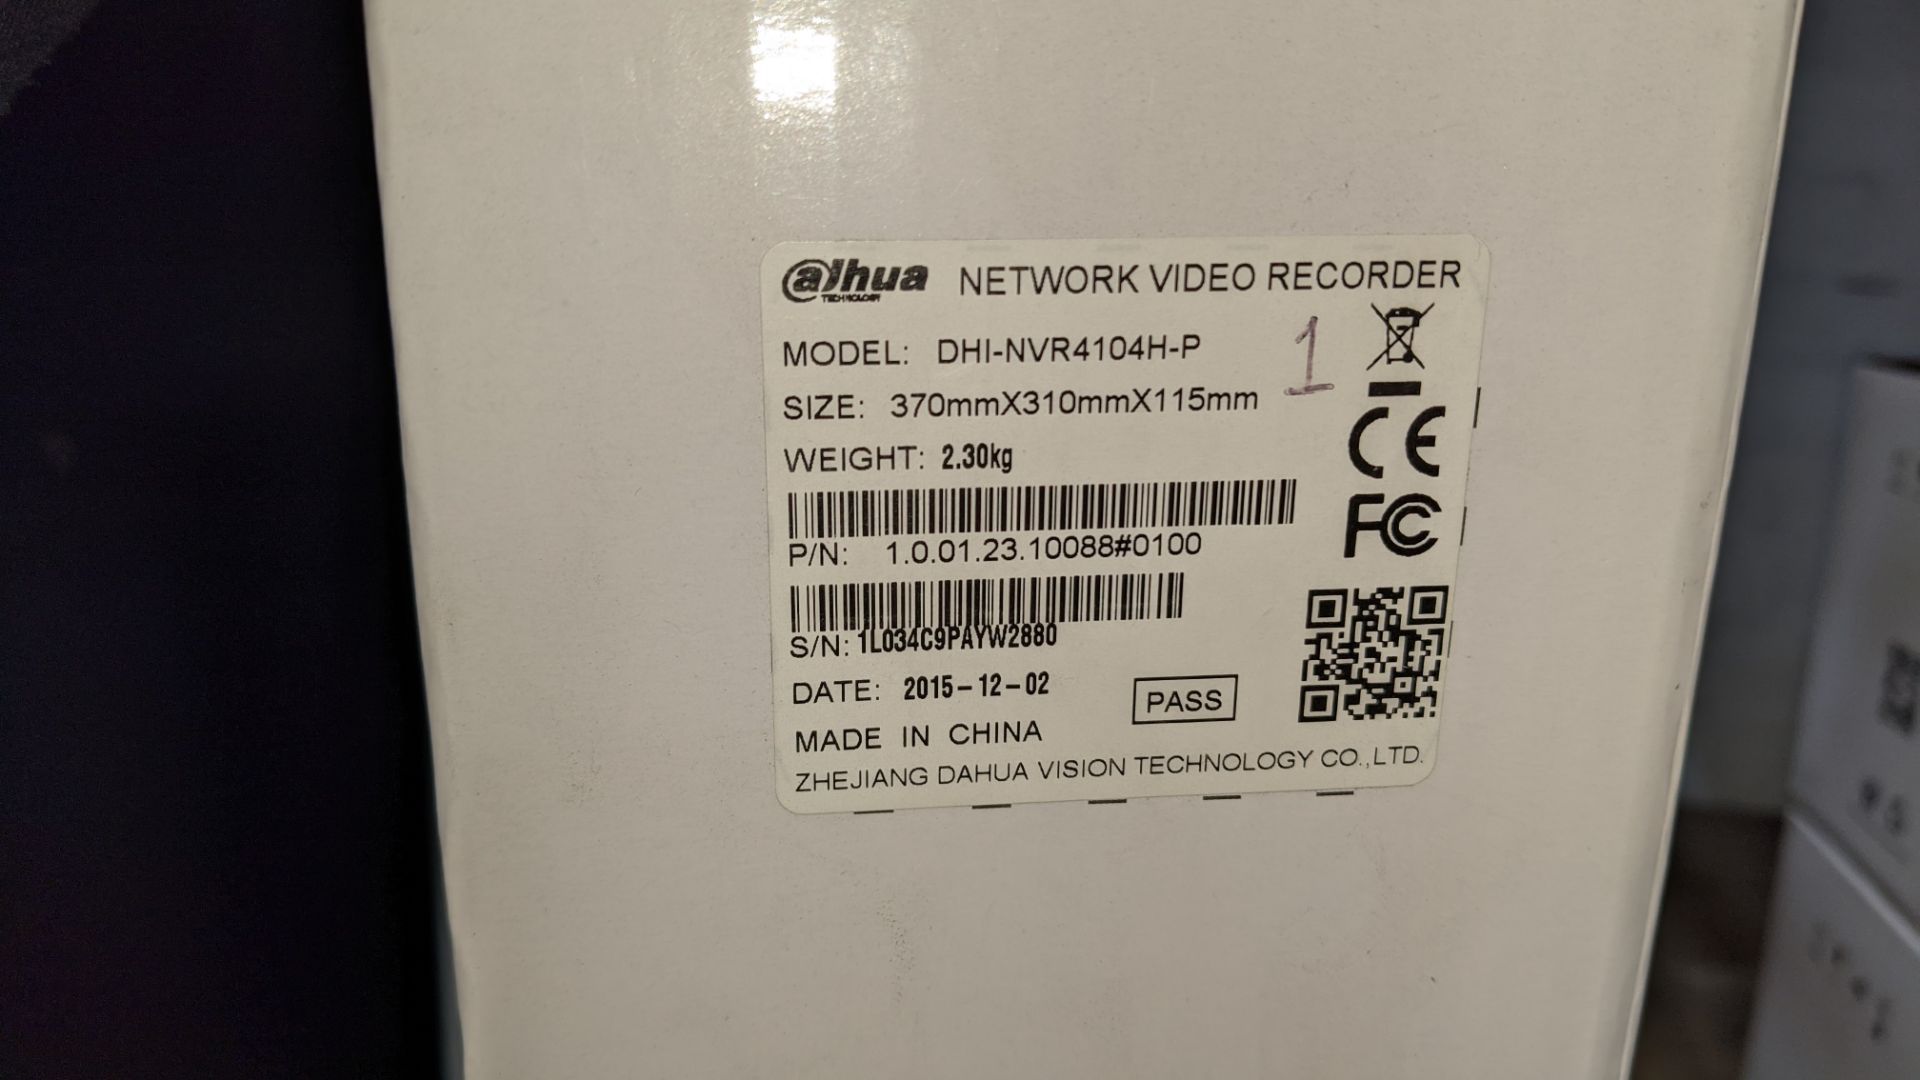 Alhua Technology network video recorder model DHI-NVR4104H-P - Image 3 of 3